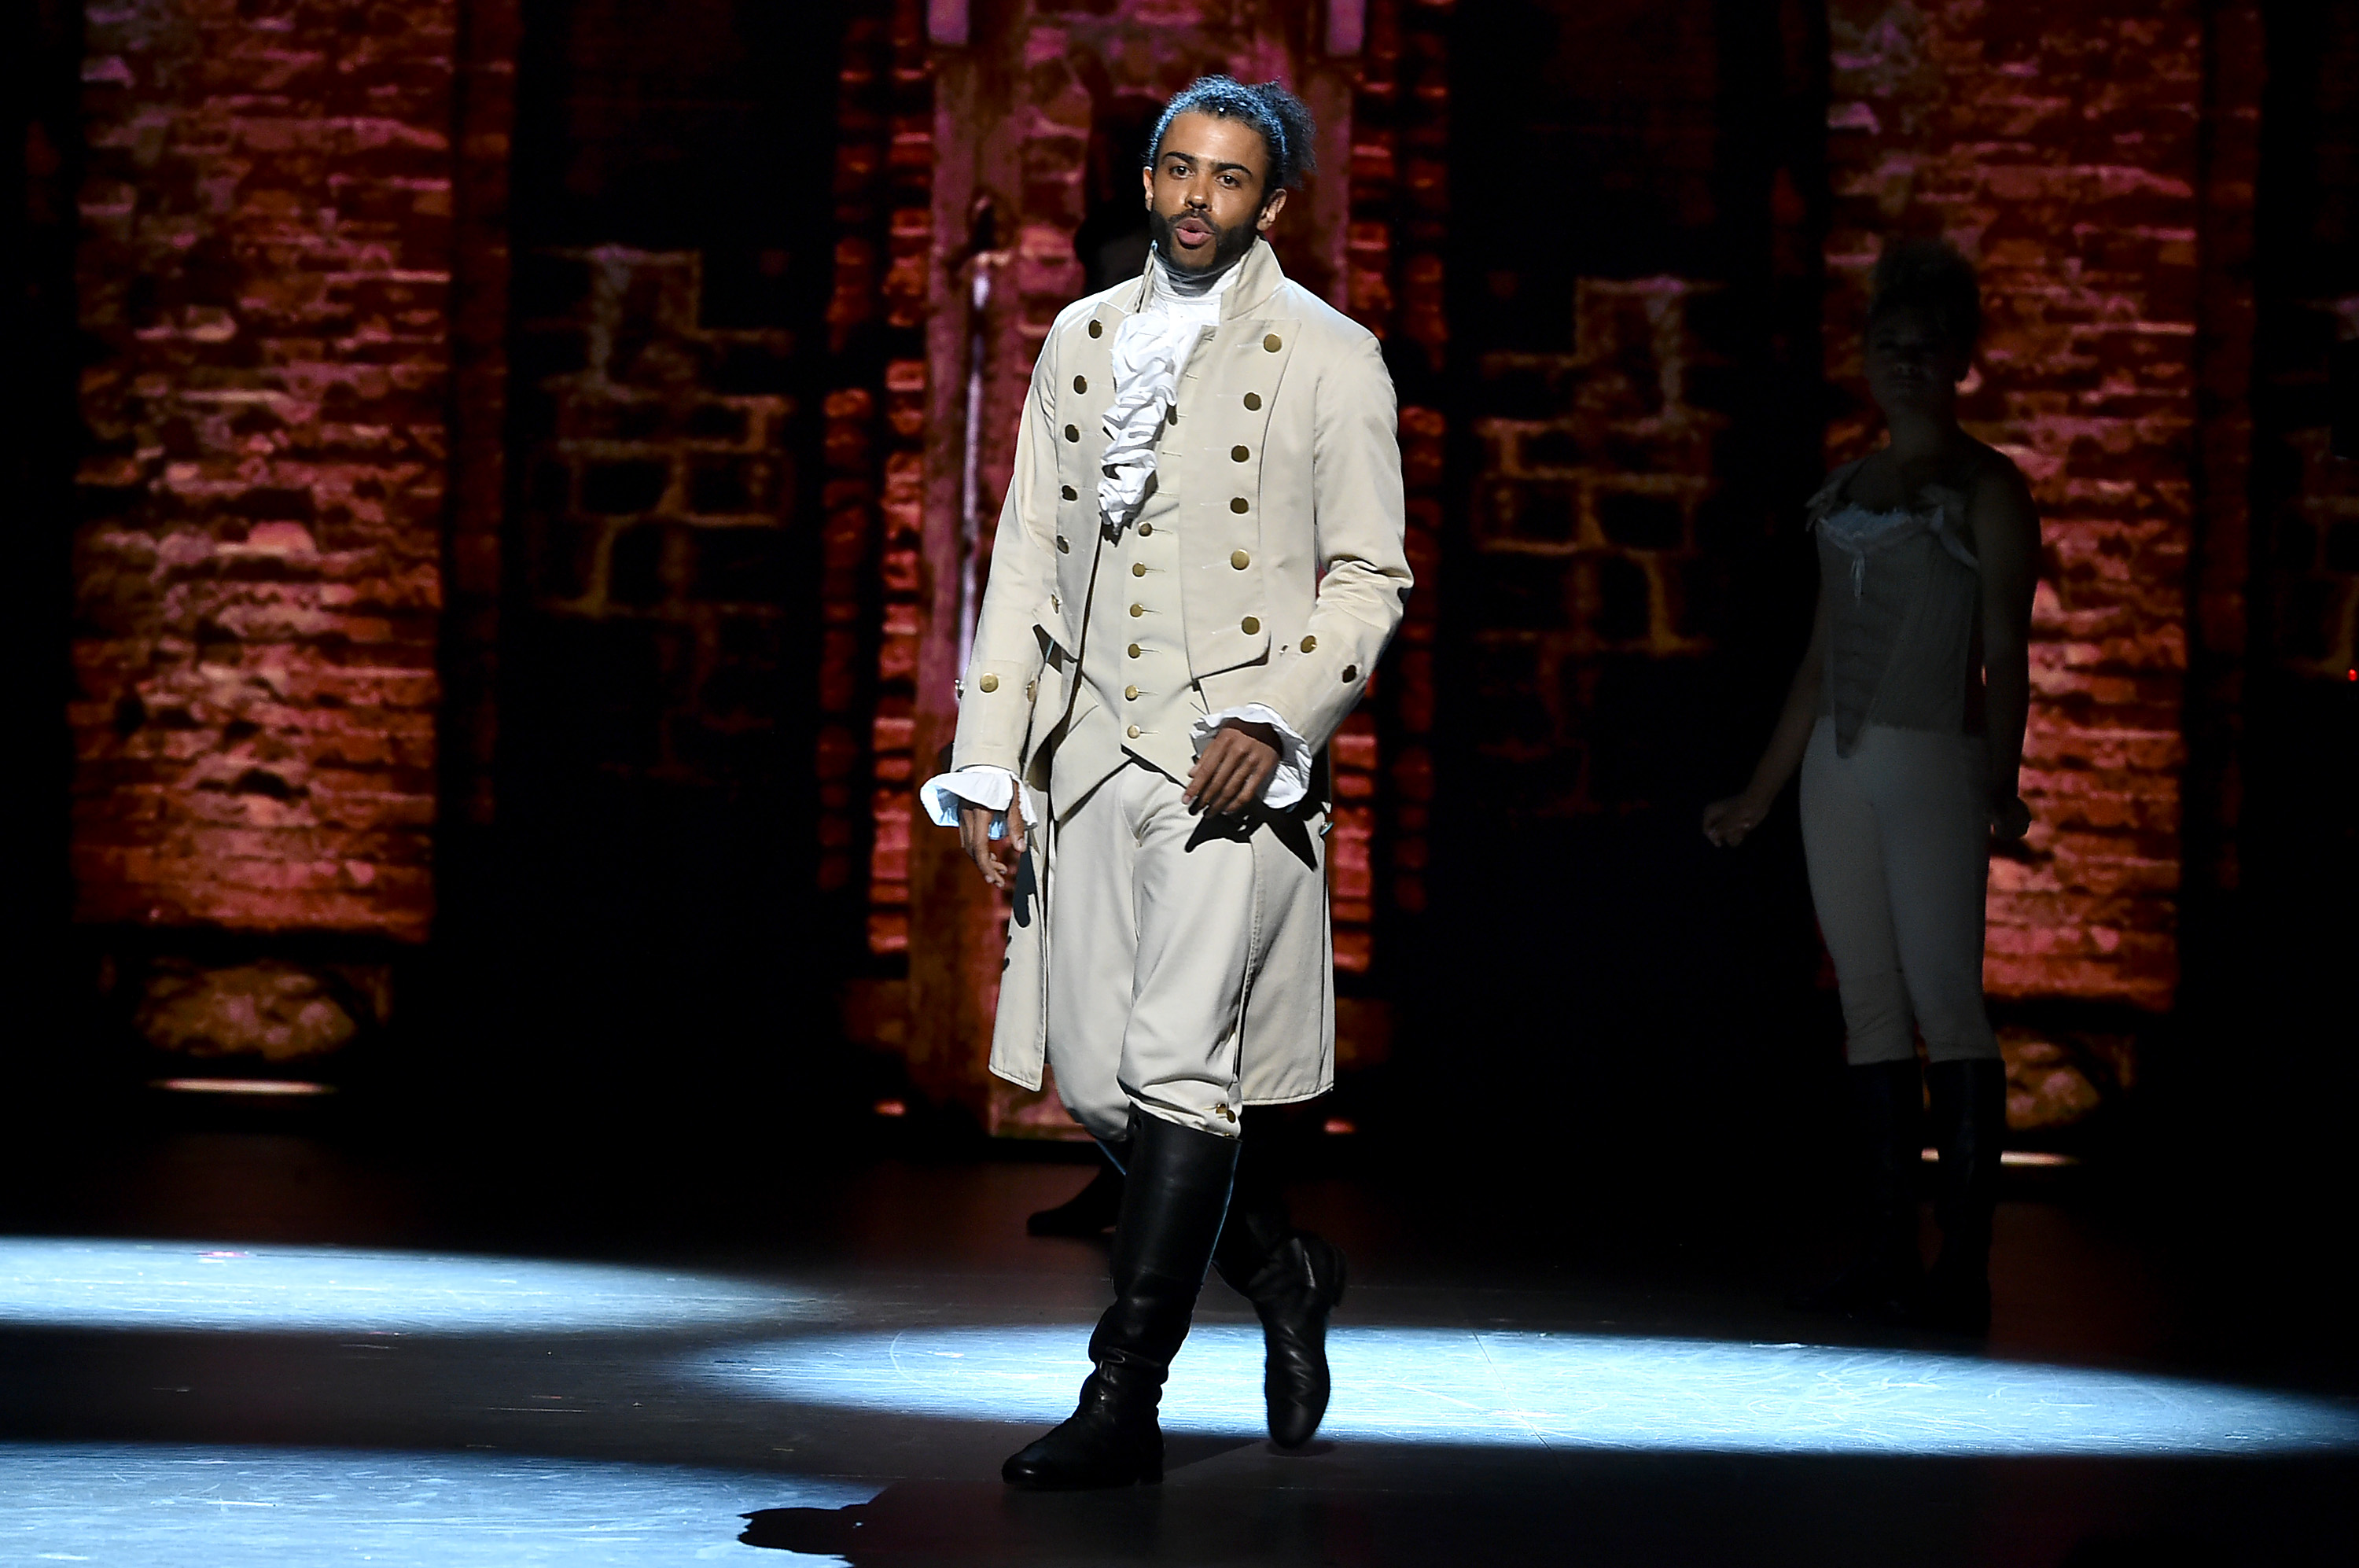 Daveed Diggs of 'Hamilton' performs on stage during the 70th Annual Tony Awards